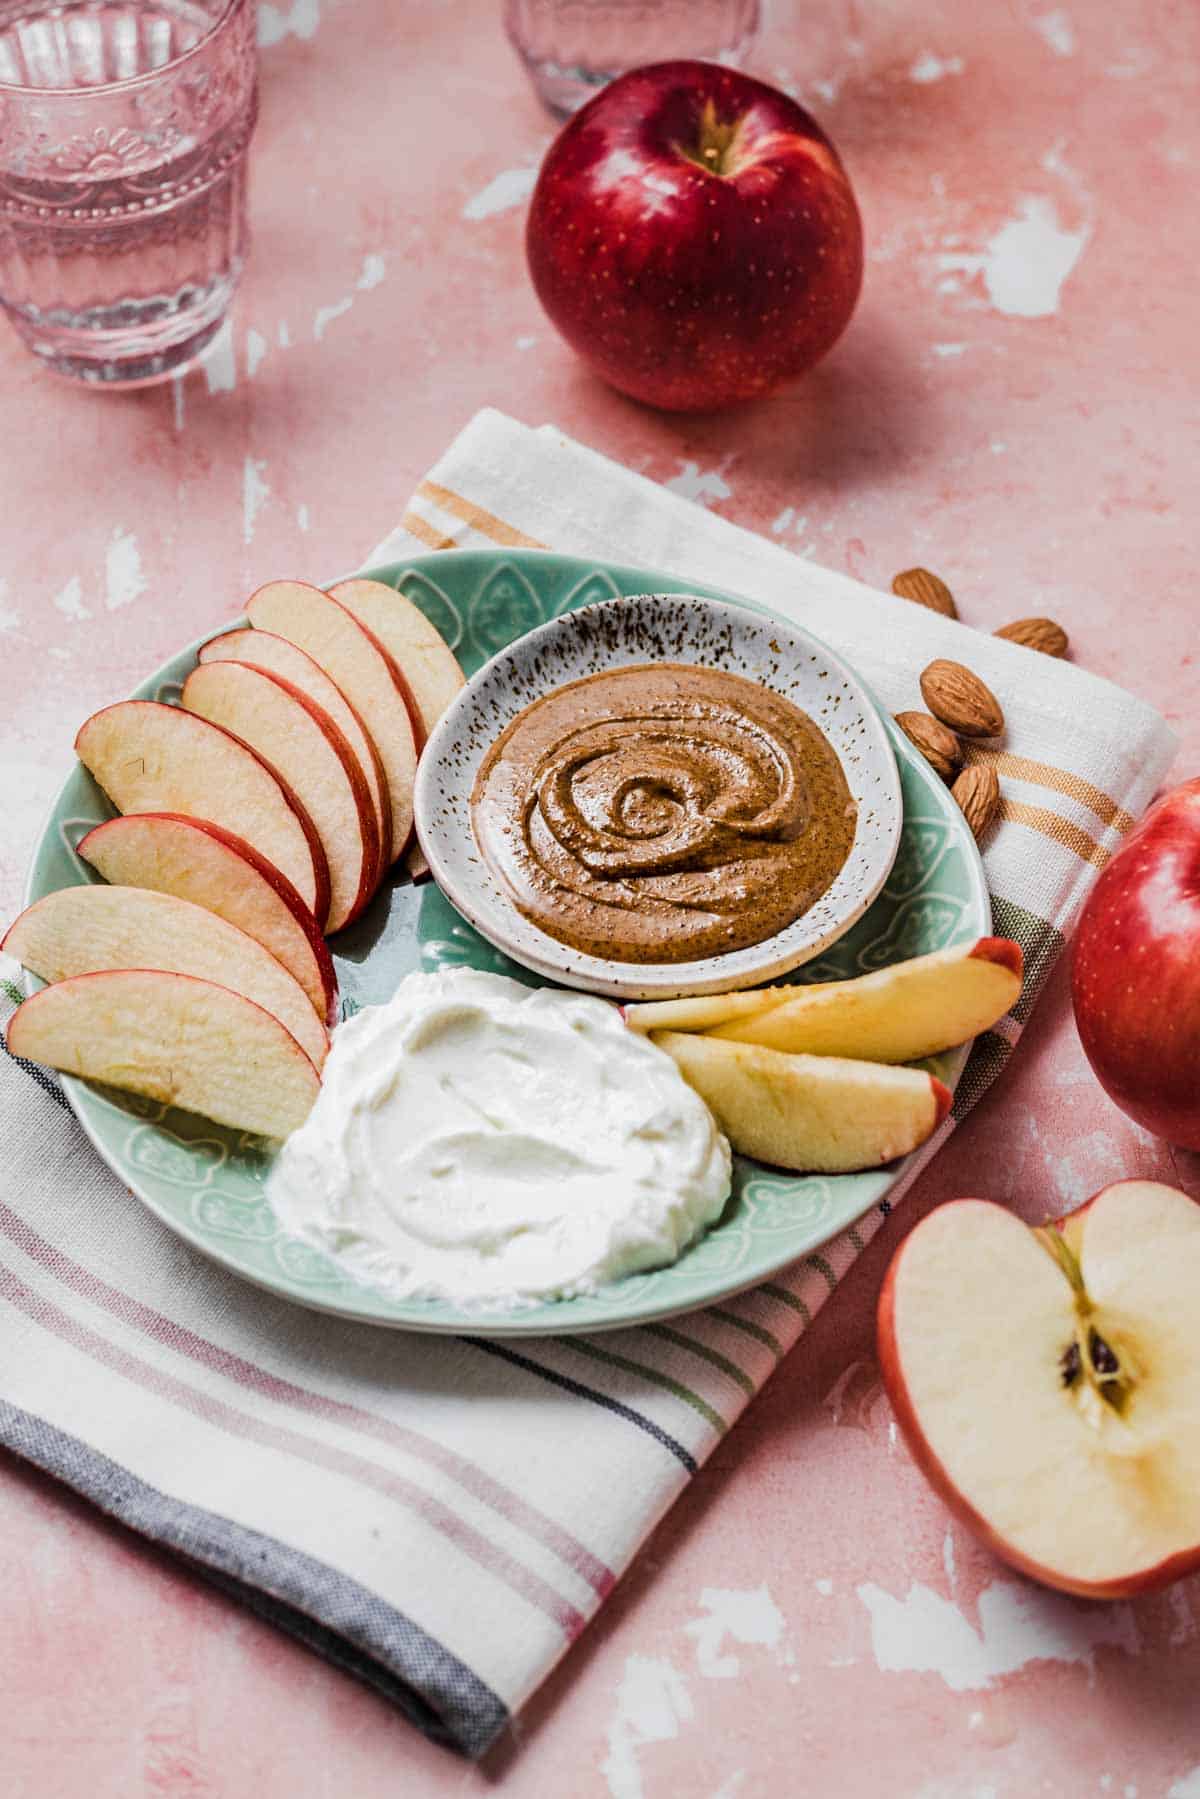 Close up image of balanced snack of sliced apples with a side of nut butter and Greek yogurt.